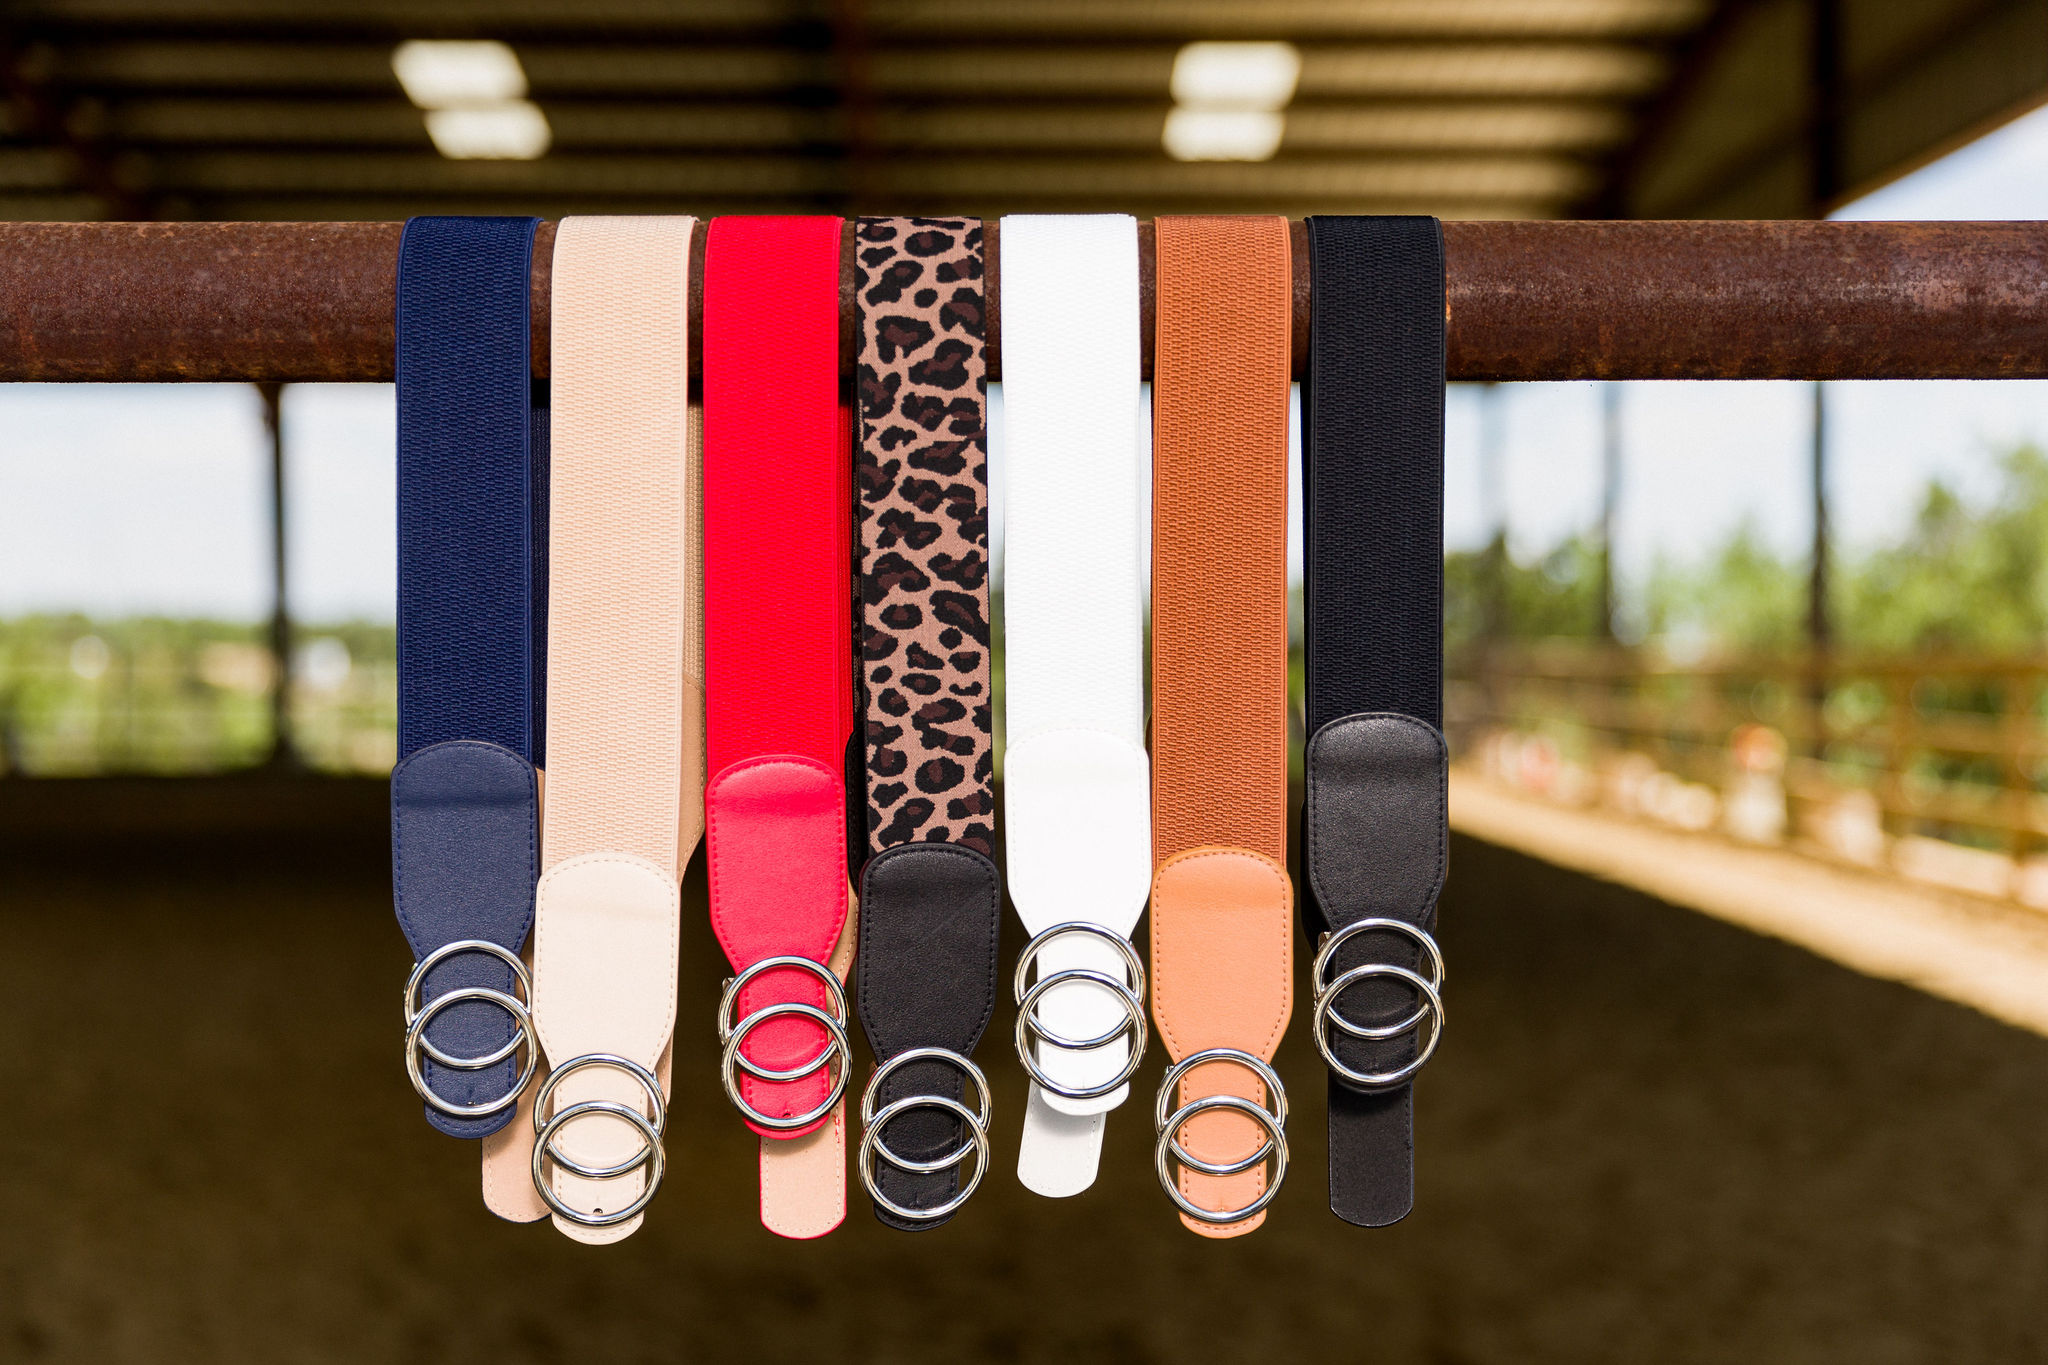 Our 7 colors of belts.